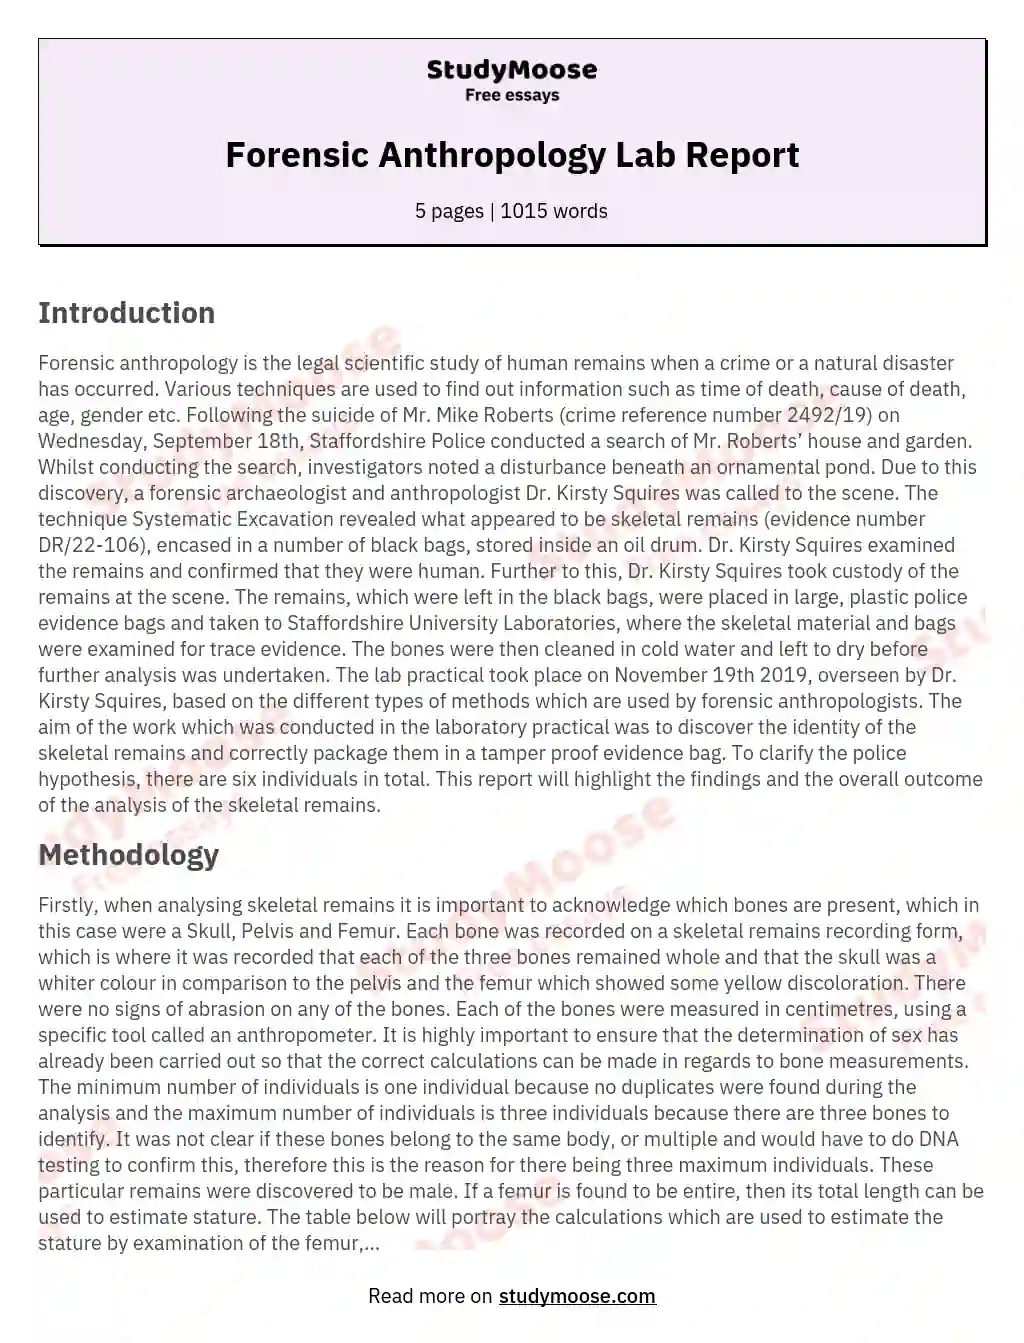 Forensic Anthropology Lab Report essay